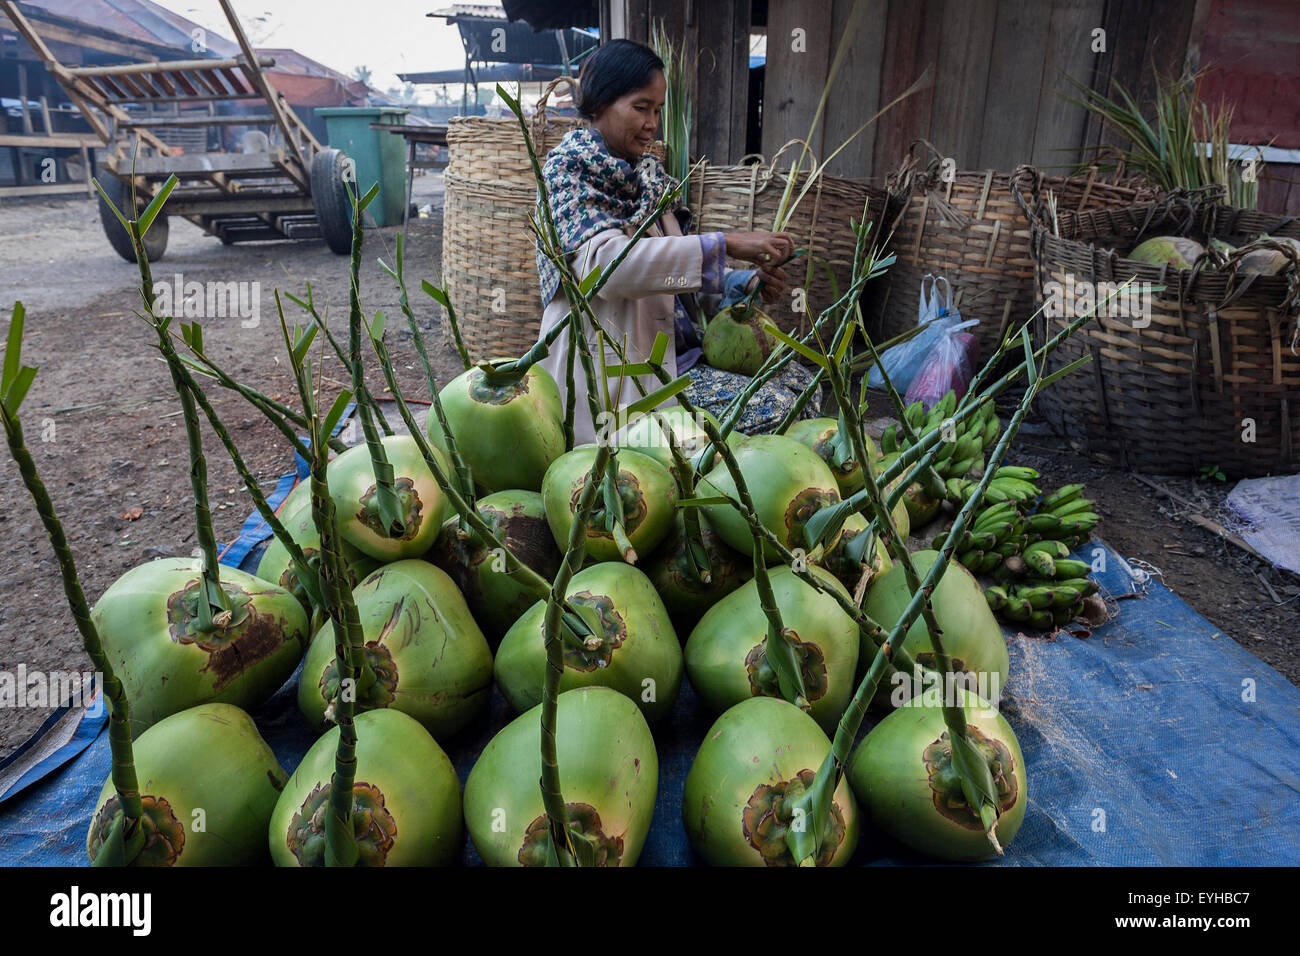 Local woman selling coconuts on the market in Nyaungshwe, Shan State, Myanmar Stock Photo